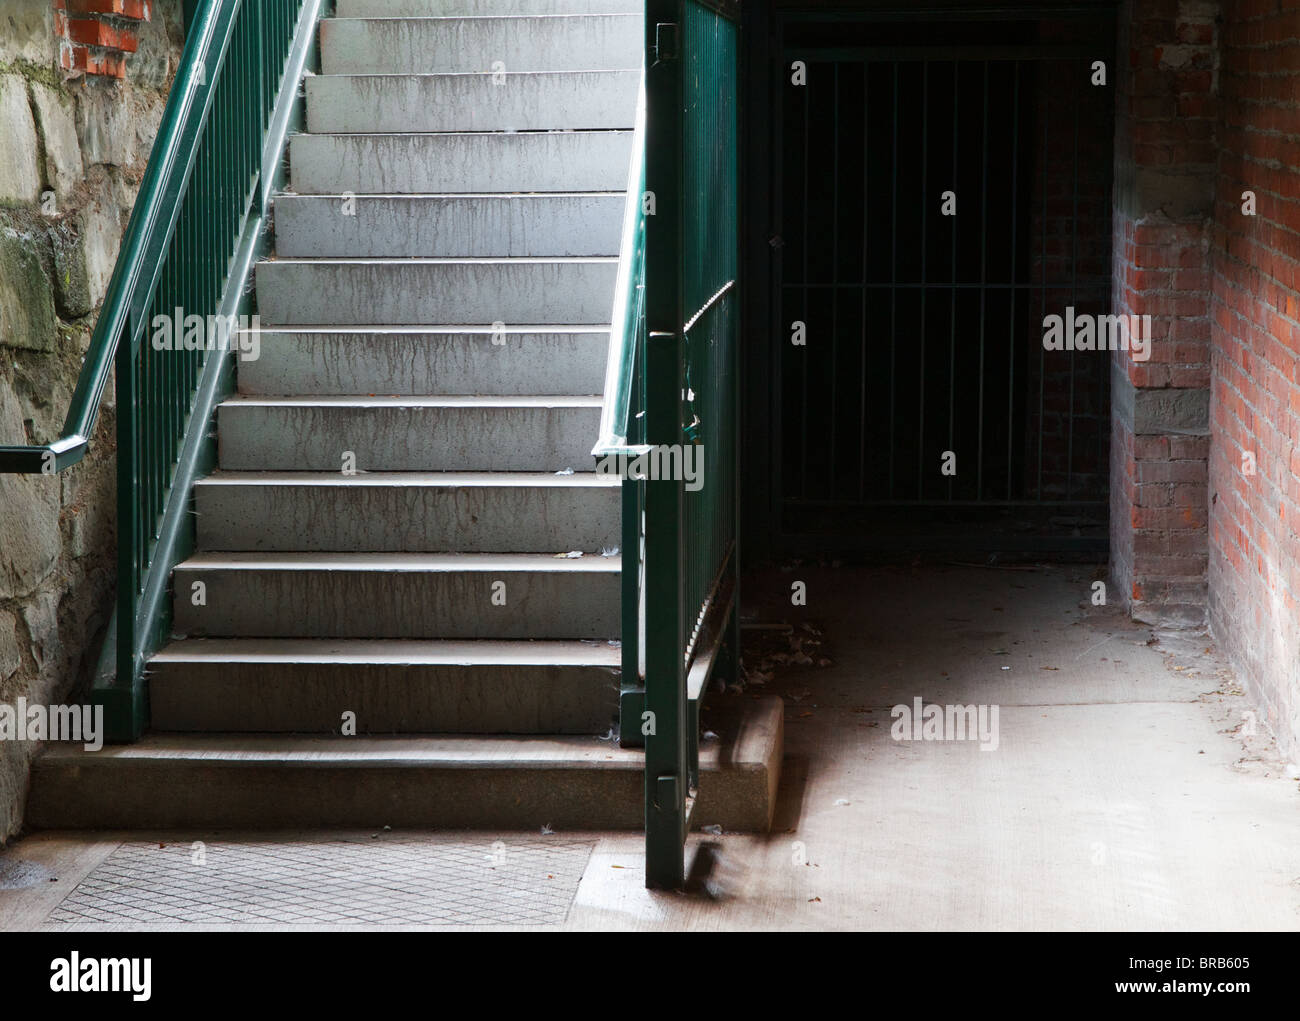 Green railing City Cellar Stairs leading down to stone and brick lower level Stock Photo